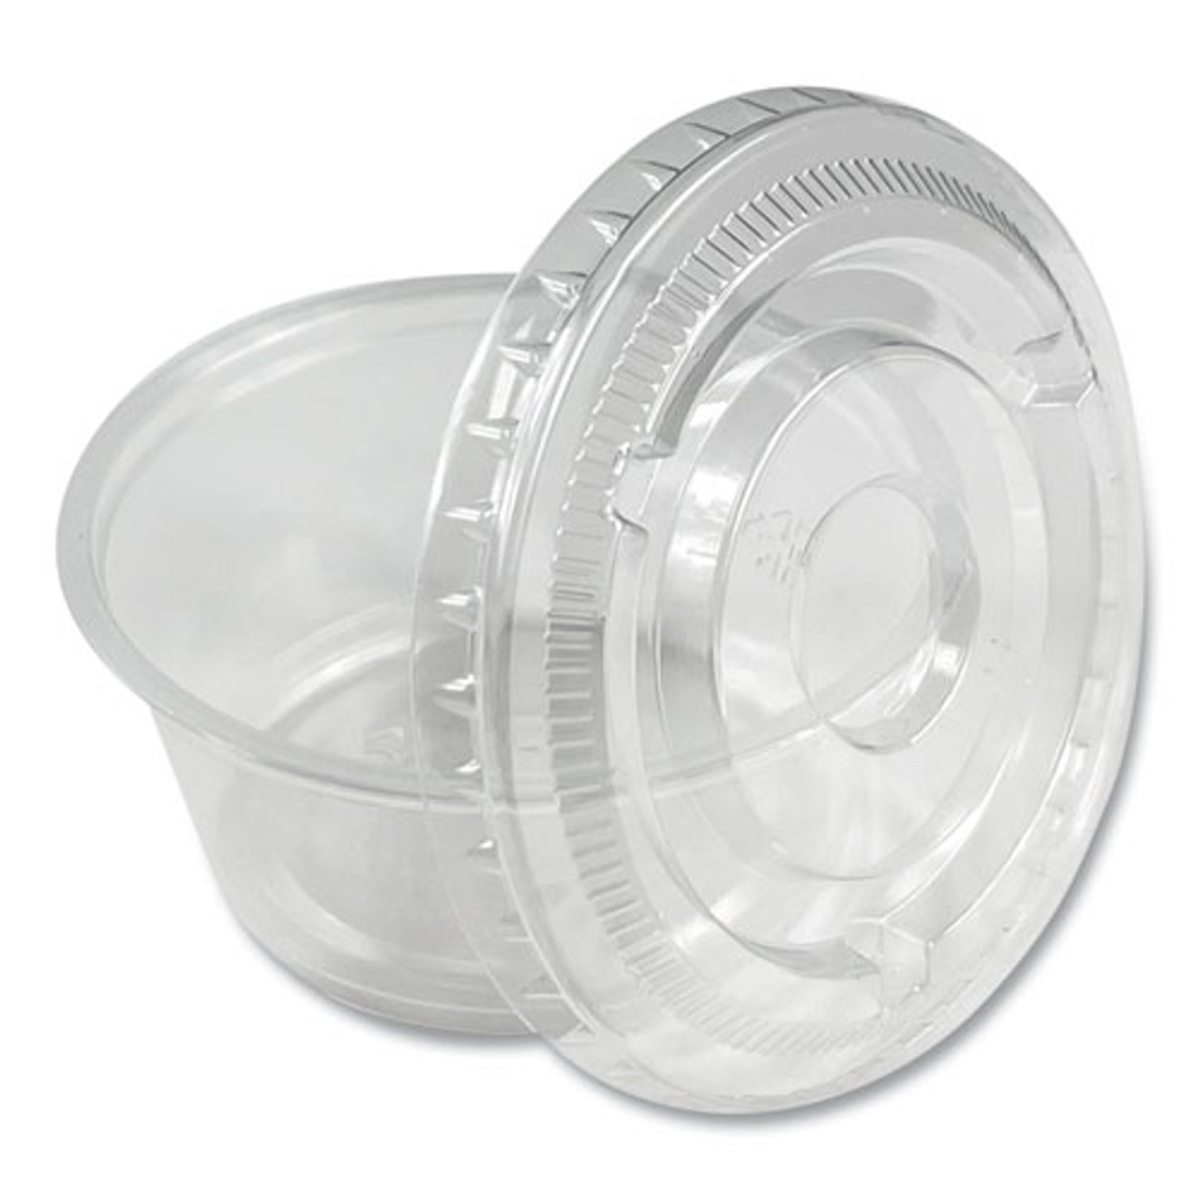 Picture of Boardwalk BWKPRTN325TS 3.25 oz Polypropylene Souffle Portion Cups, Translucent - 2500 Count